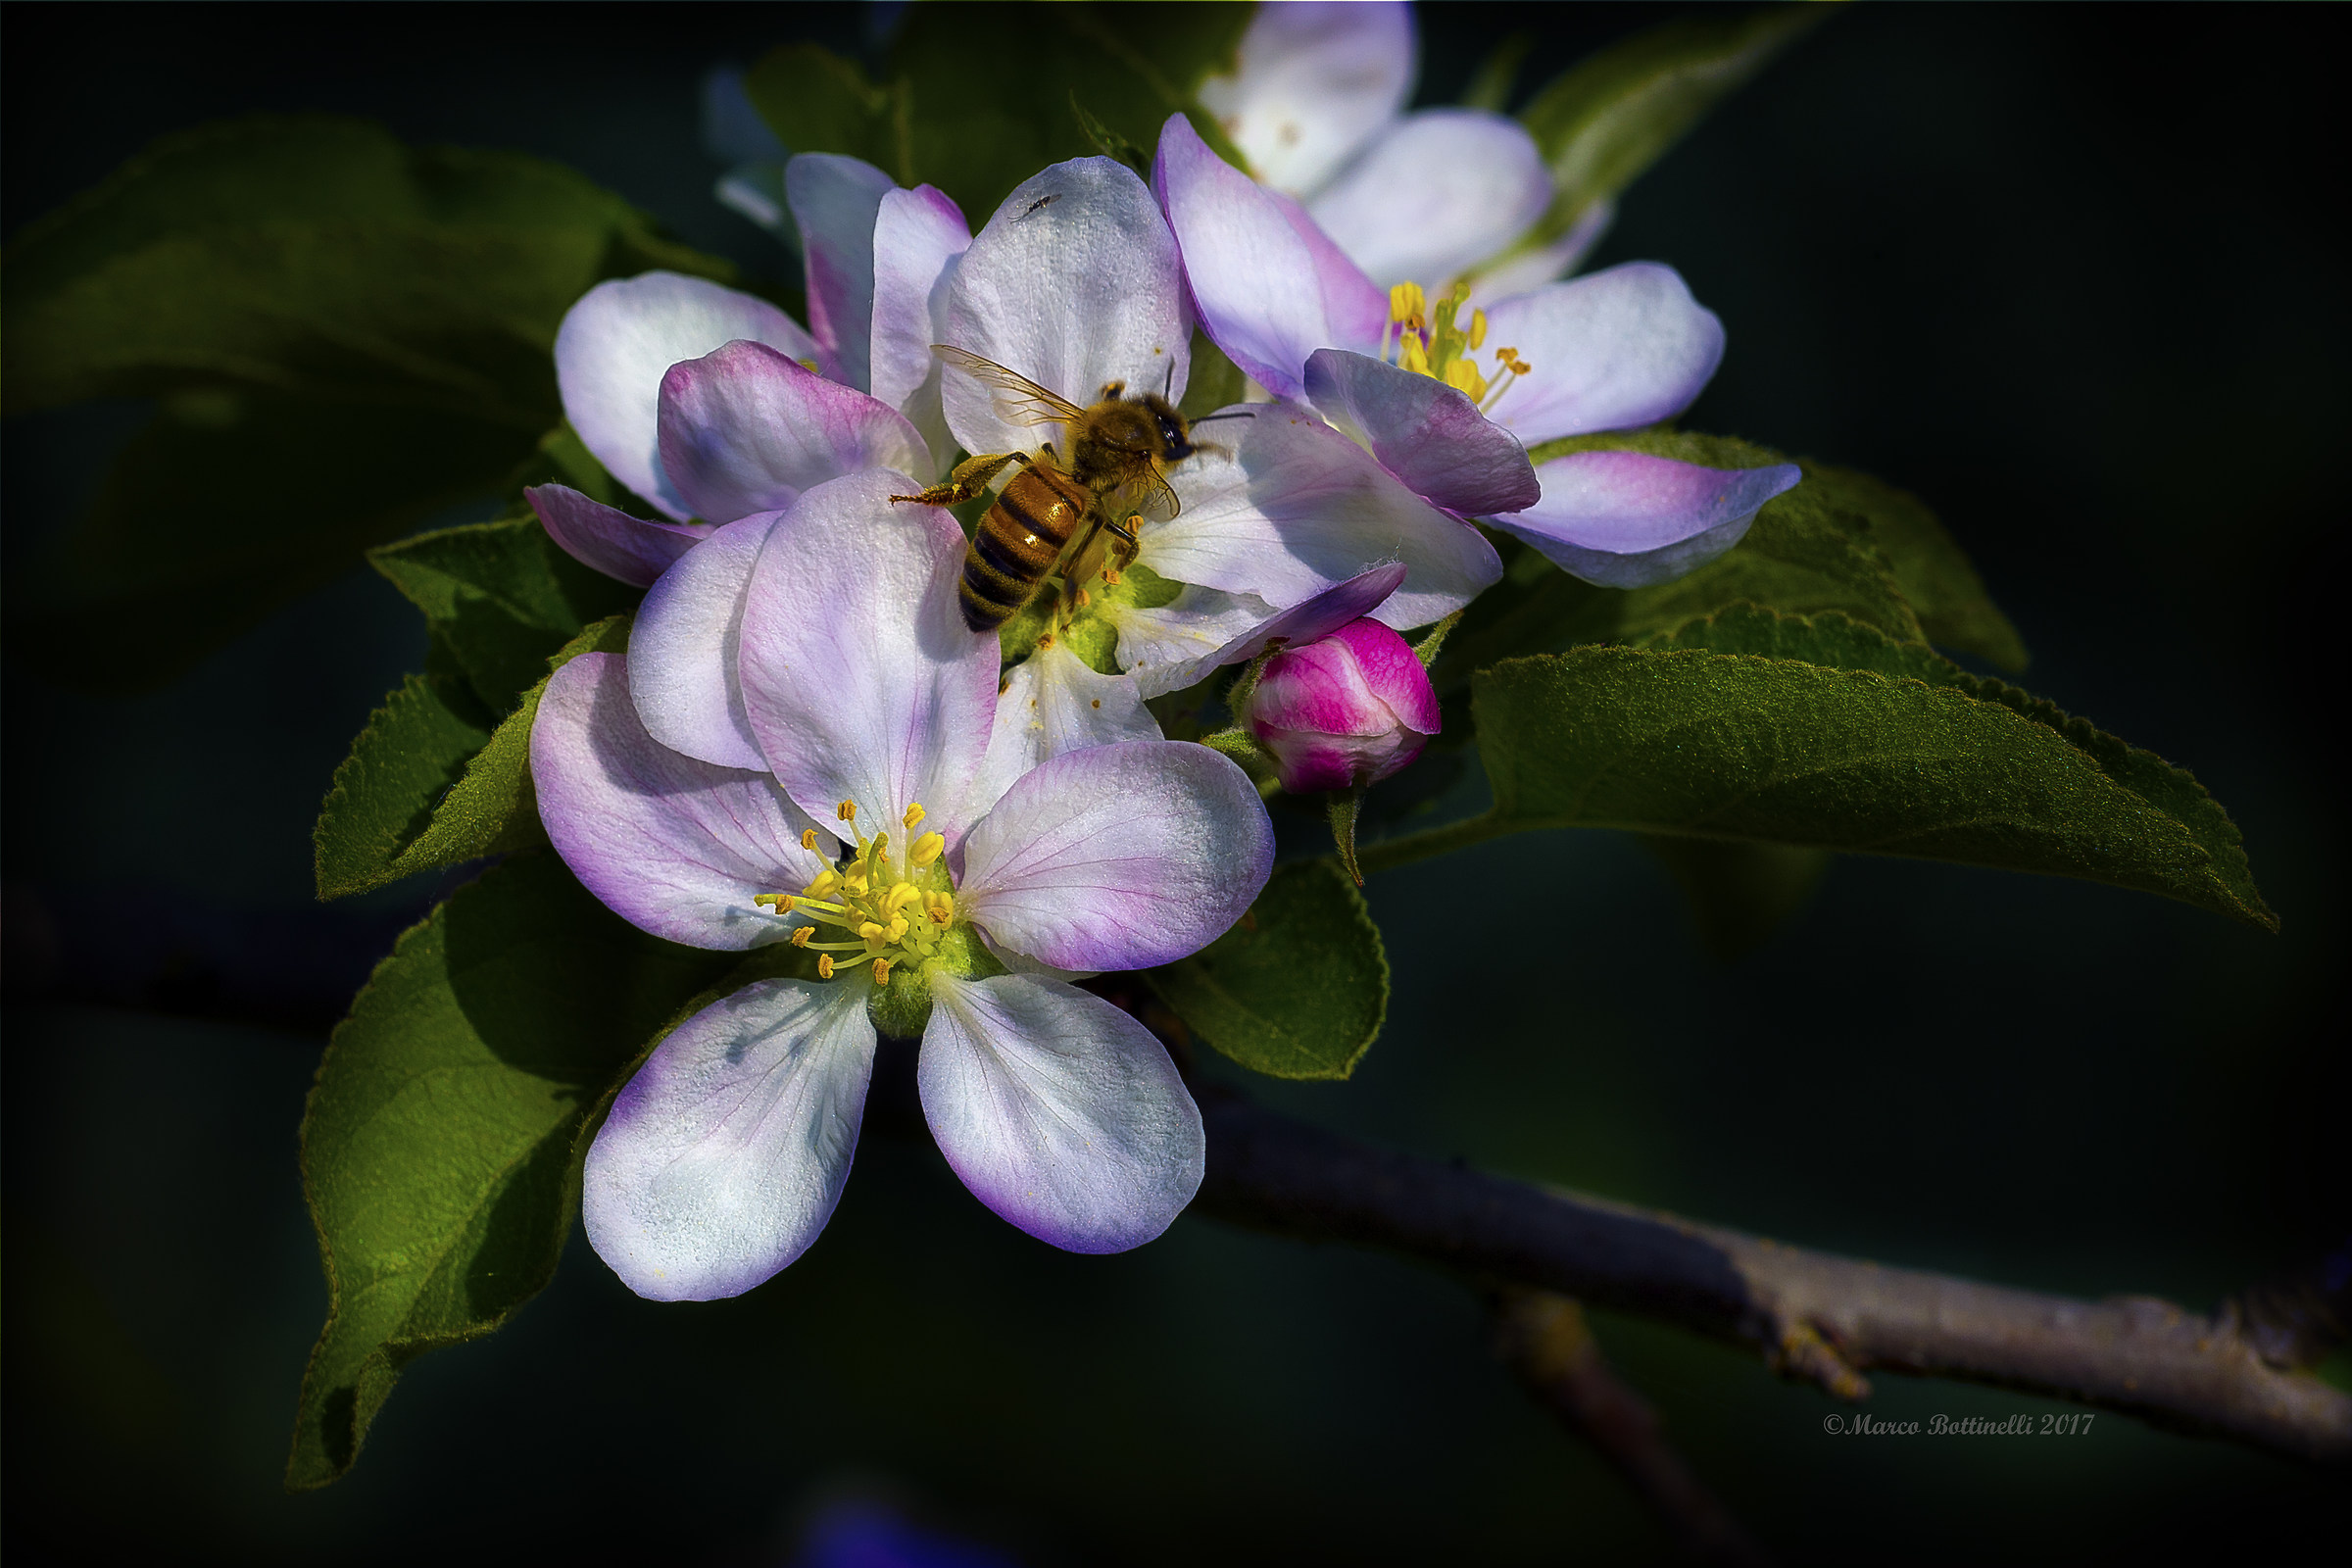 The bee and the apple blossom...